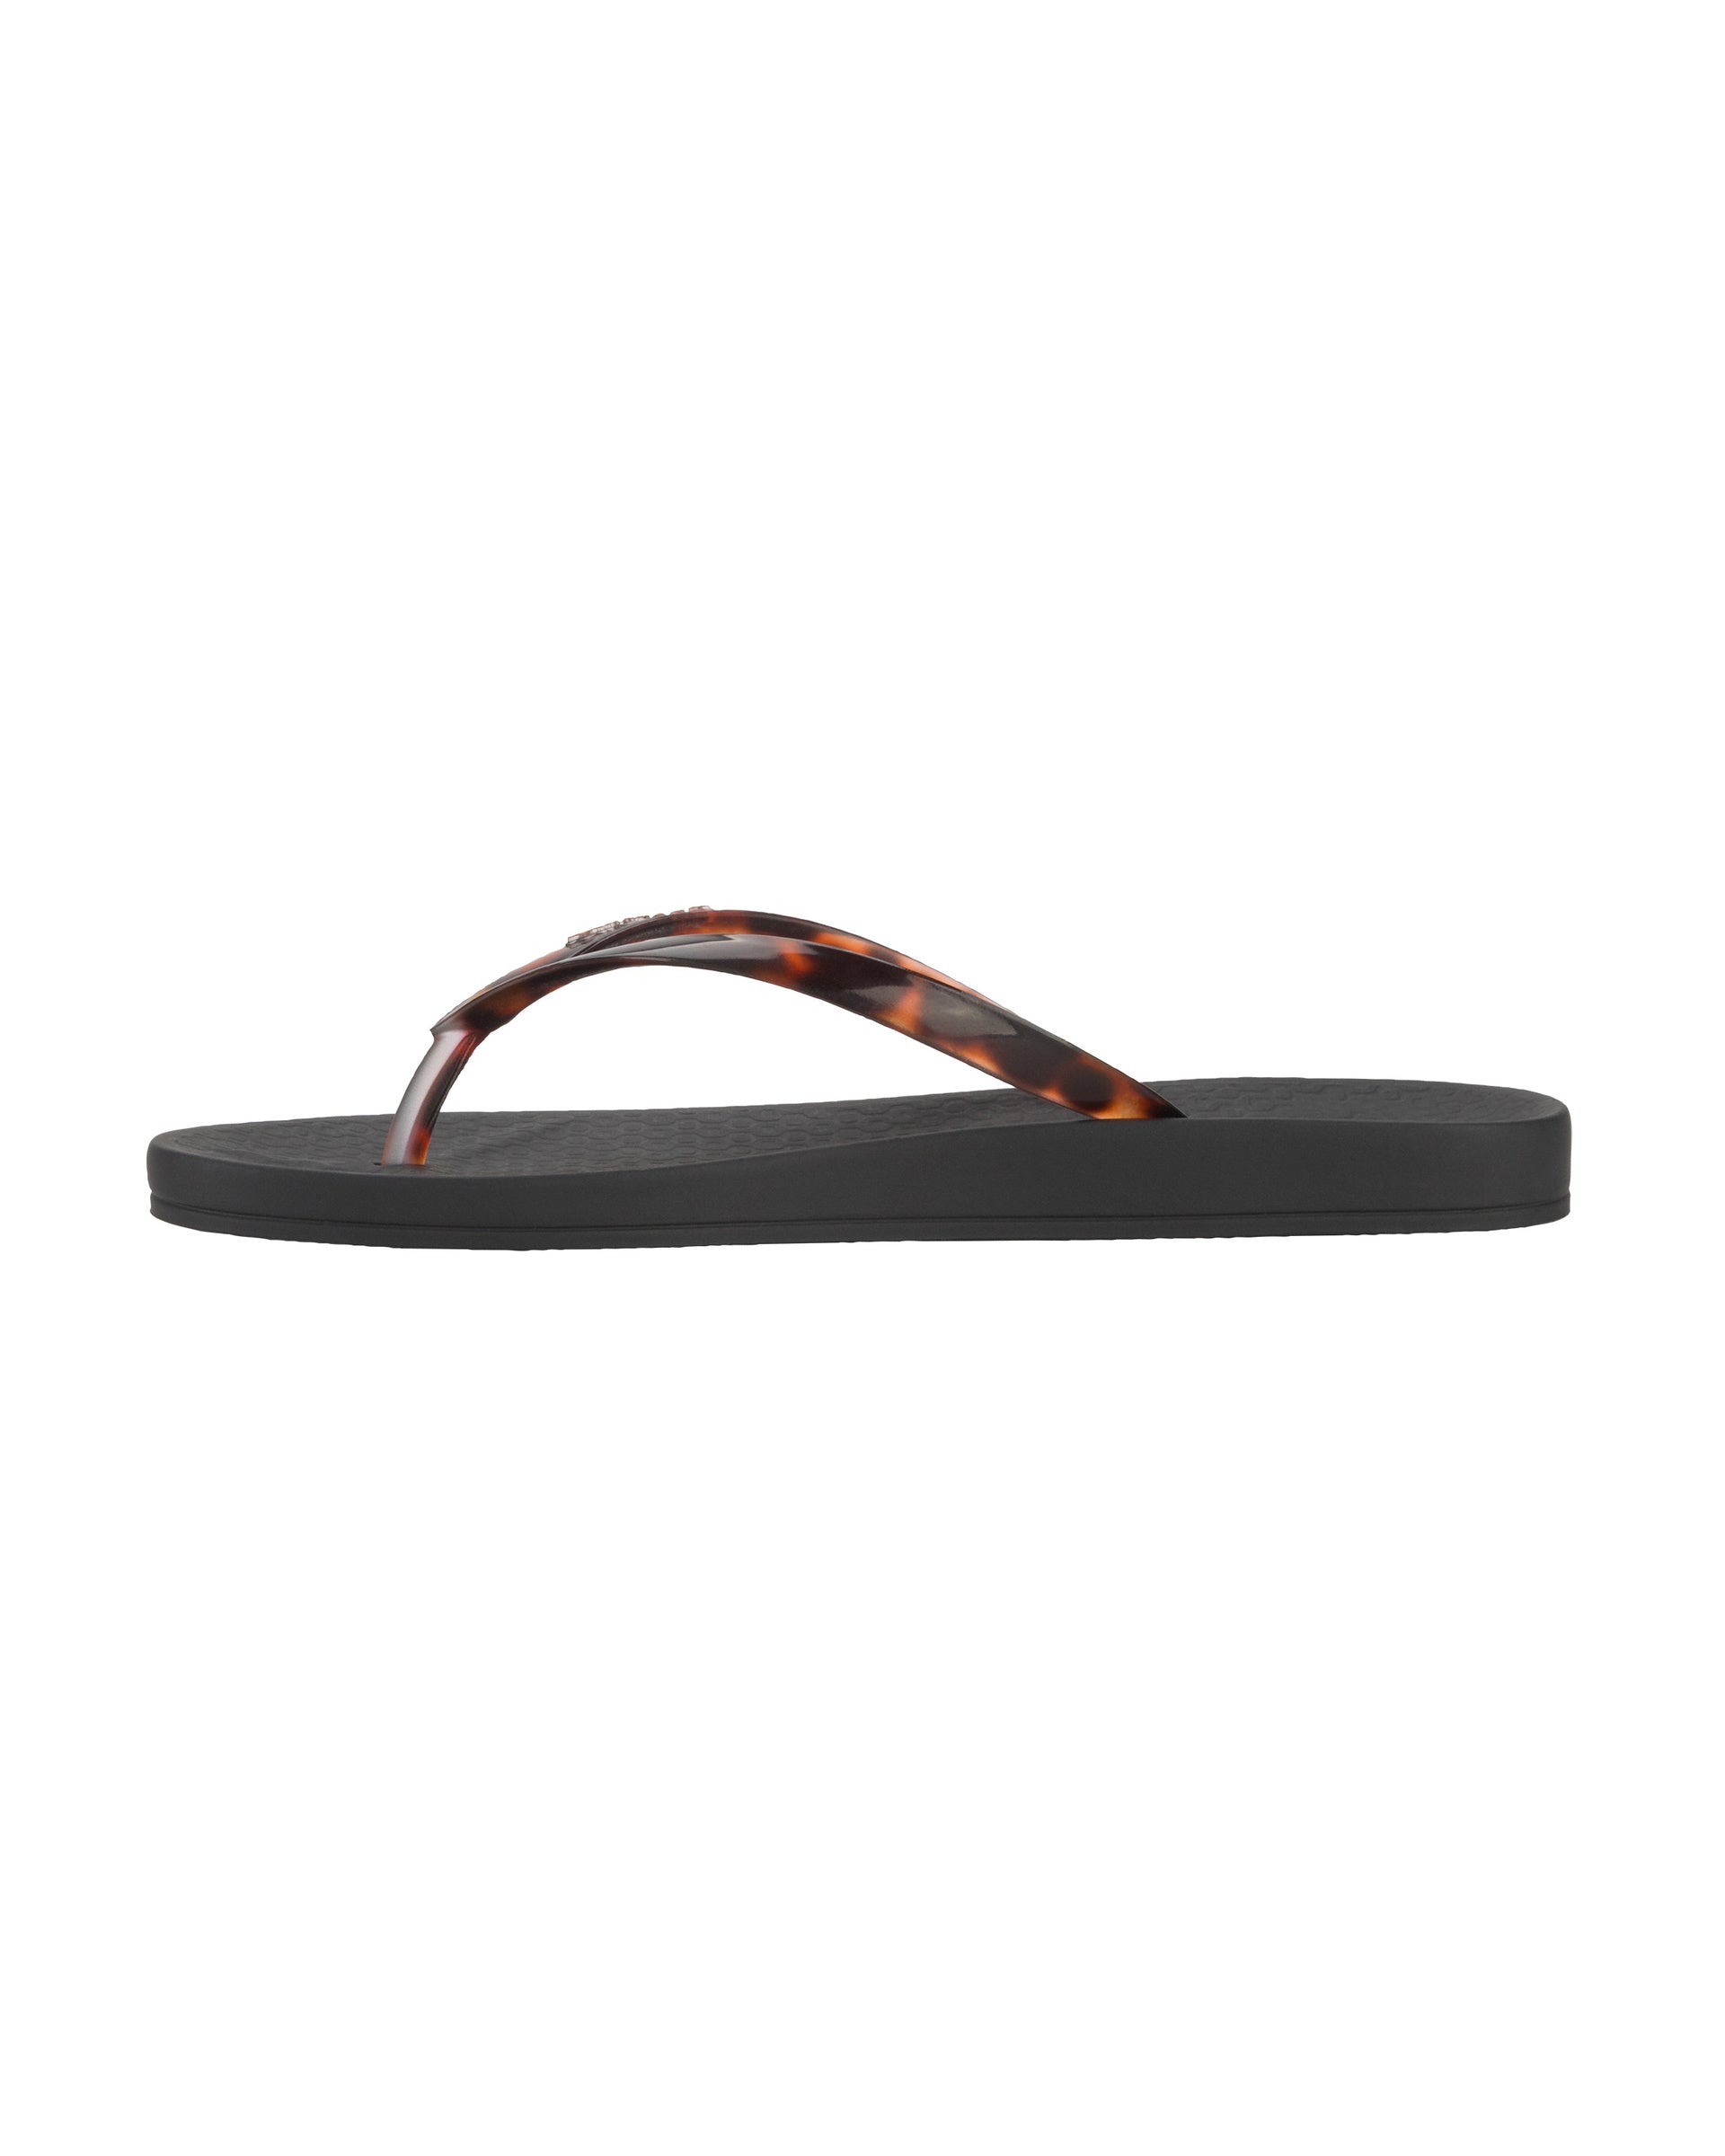 Inner side view of a black Ipanema Ana Connect women's flip flop with brown tortoiseshell  color strap.